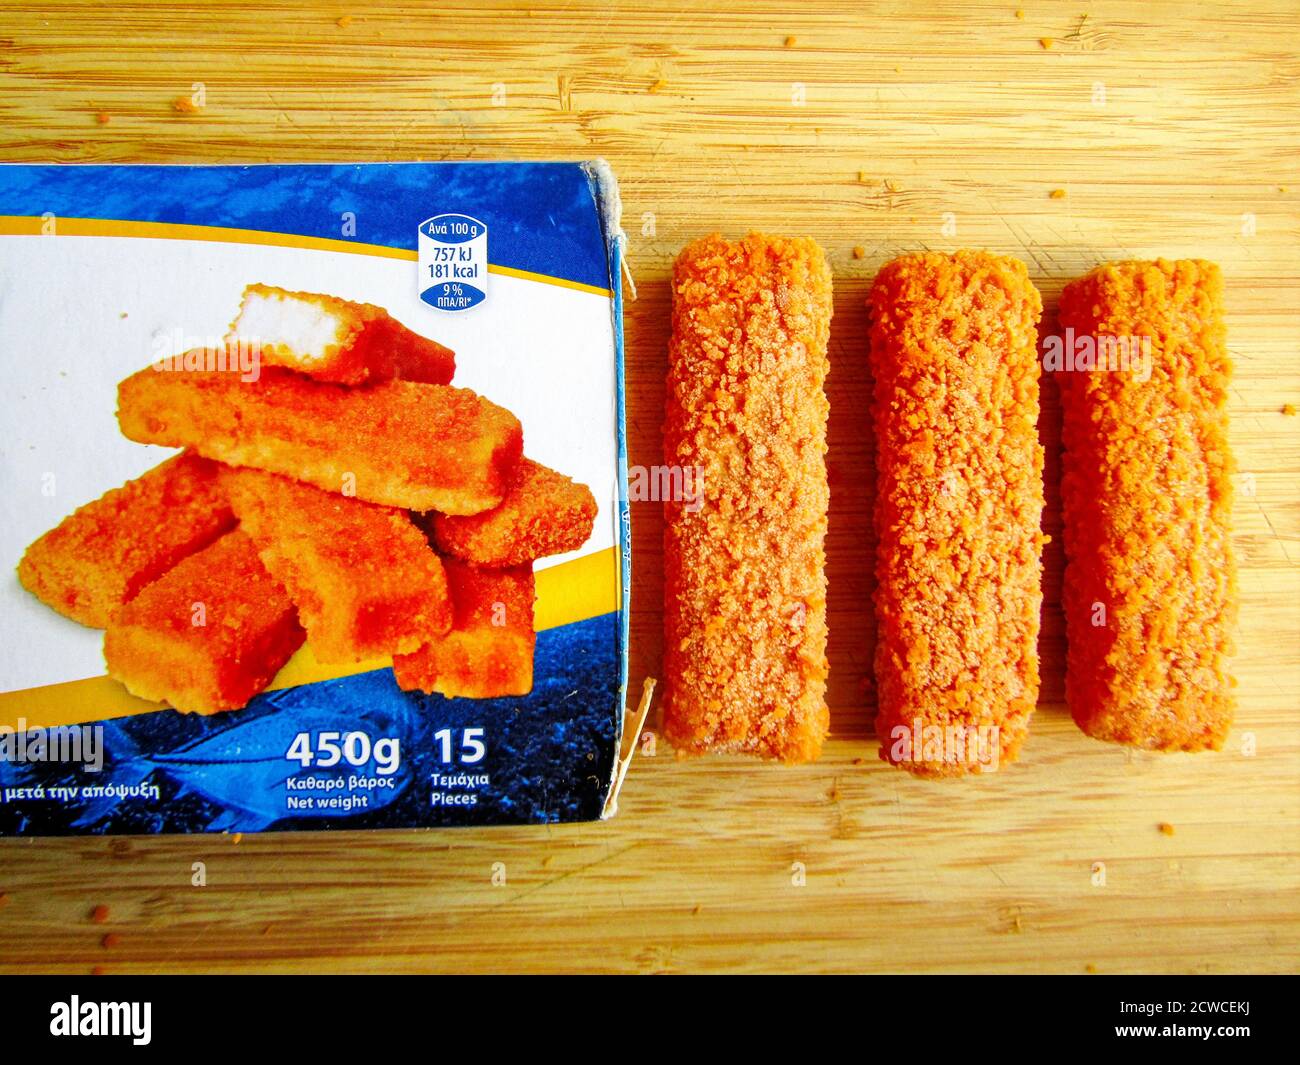 Packet of opened Greek Fish Fingers showing contents Stock Photo